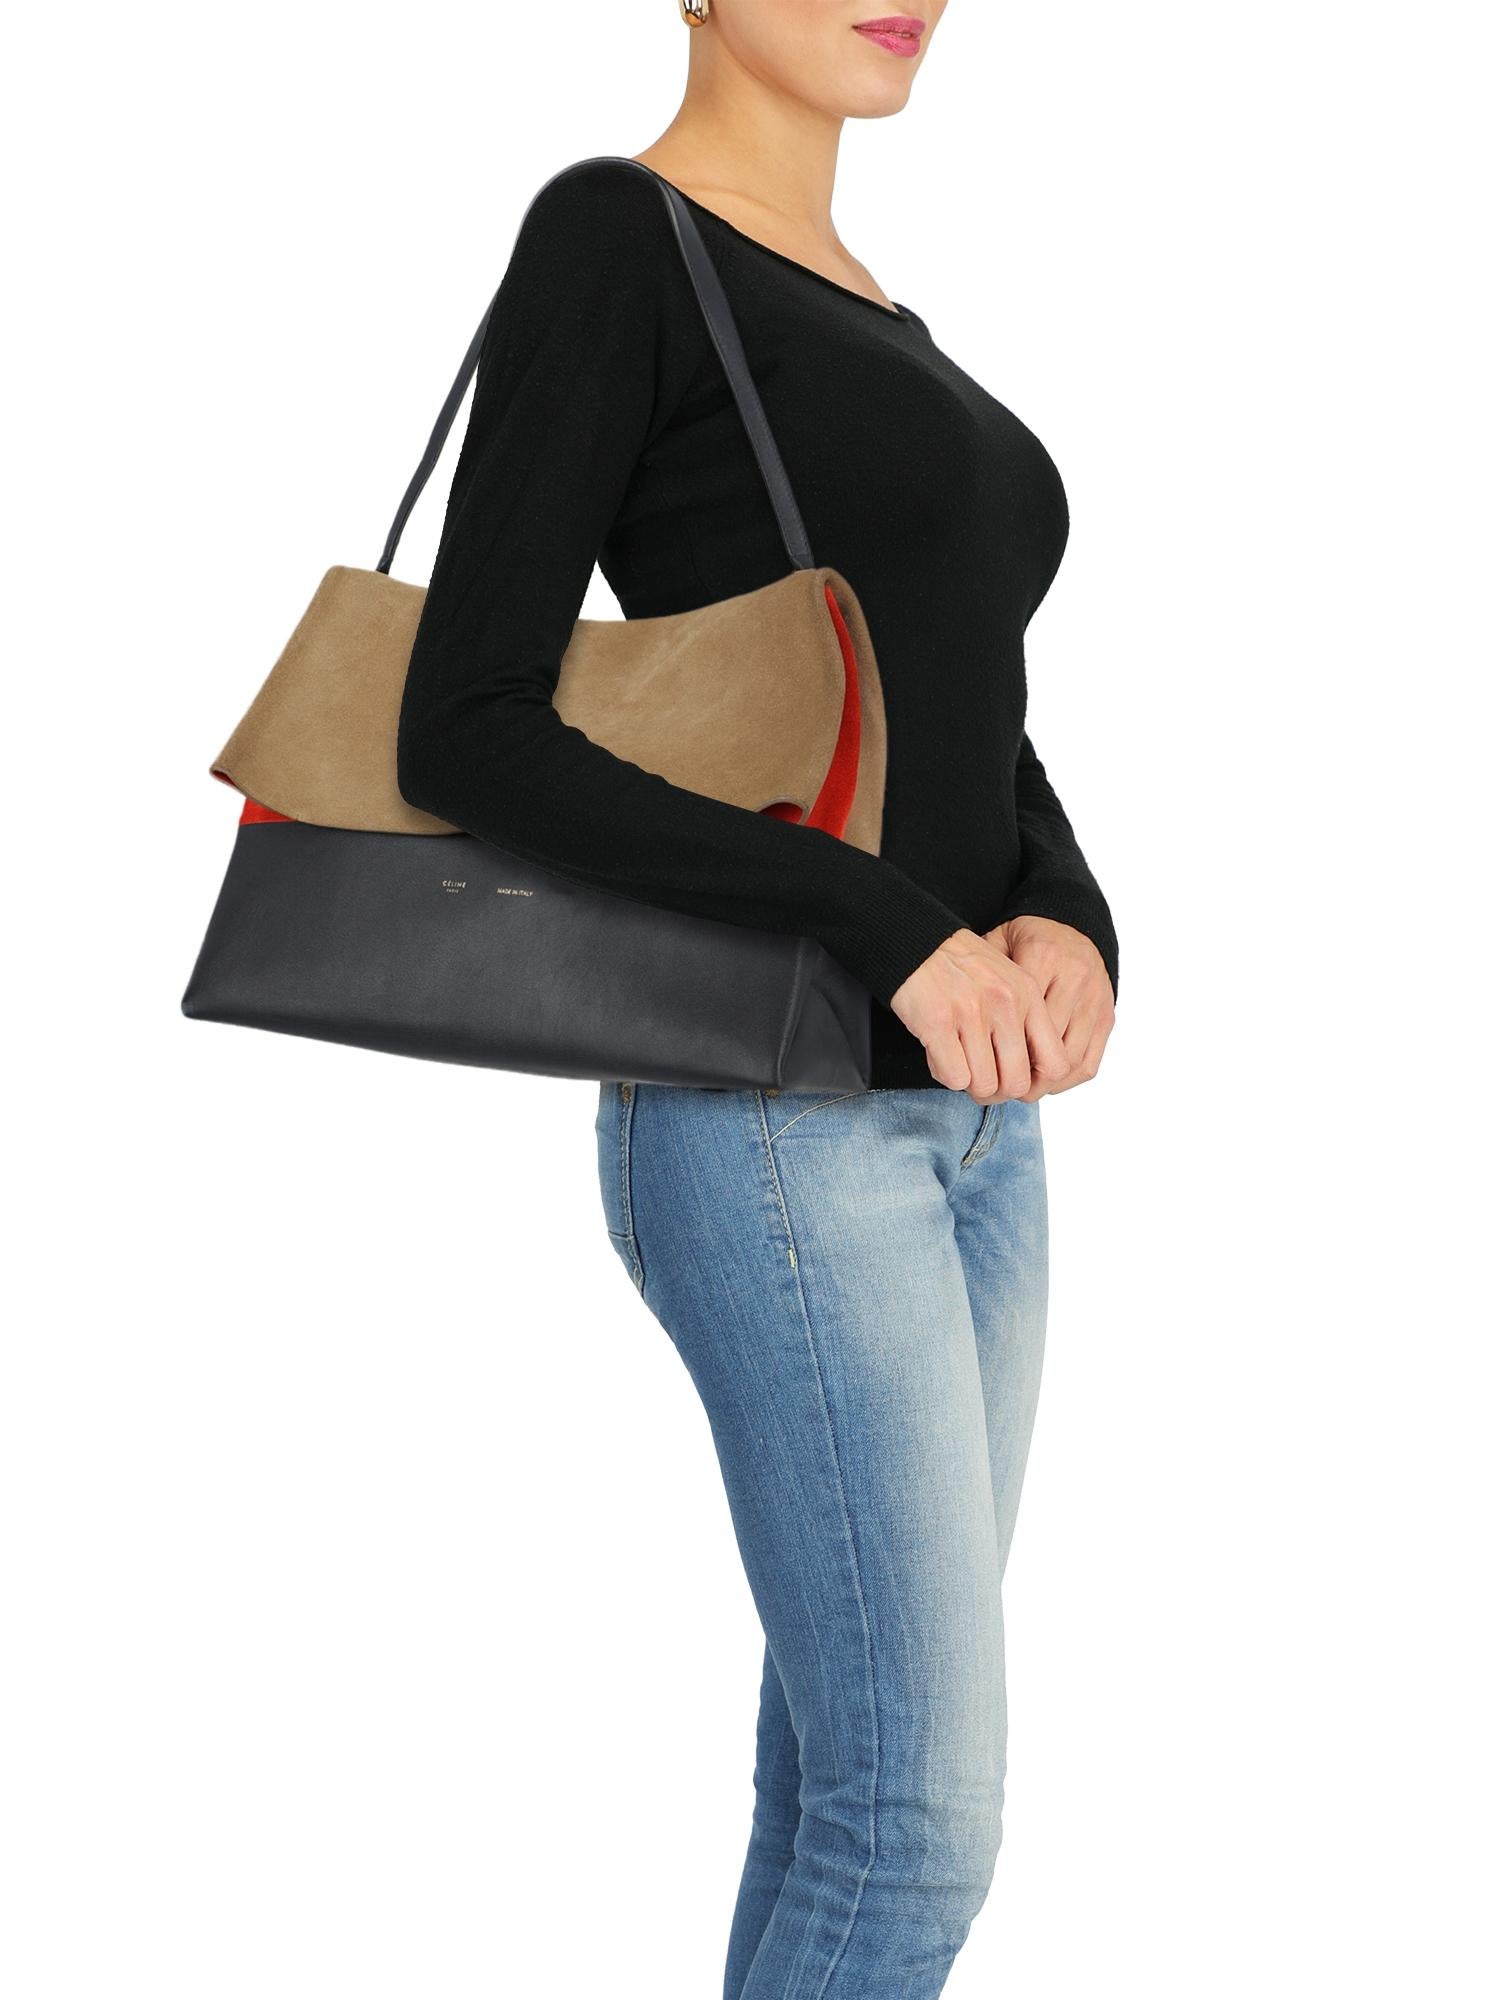 All soft, leather, solid color, front logo, with flap, silver-tone hardware, main internal compartment, suede detail, day bag

Includes: N/A

Product Condition: Good
Lining: visible abrasion, prominent loose stitching. Hardware: visible pulled